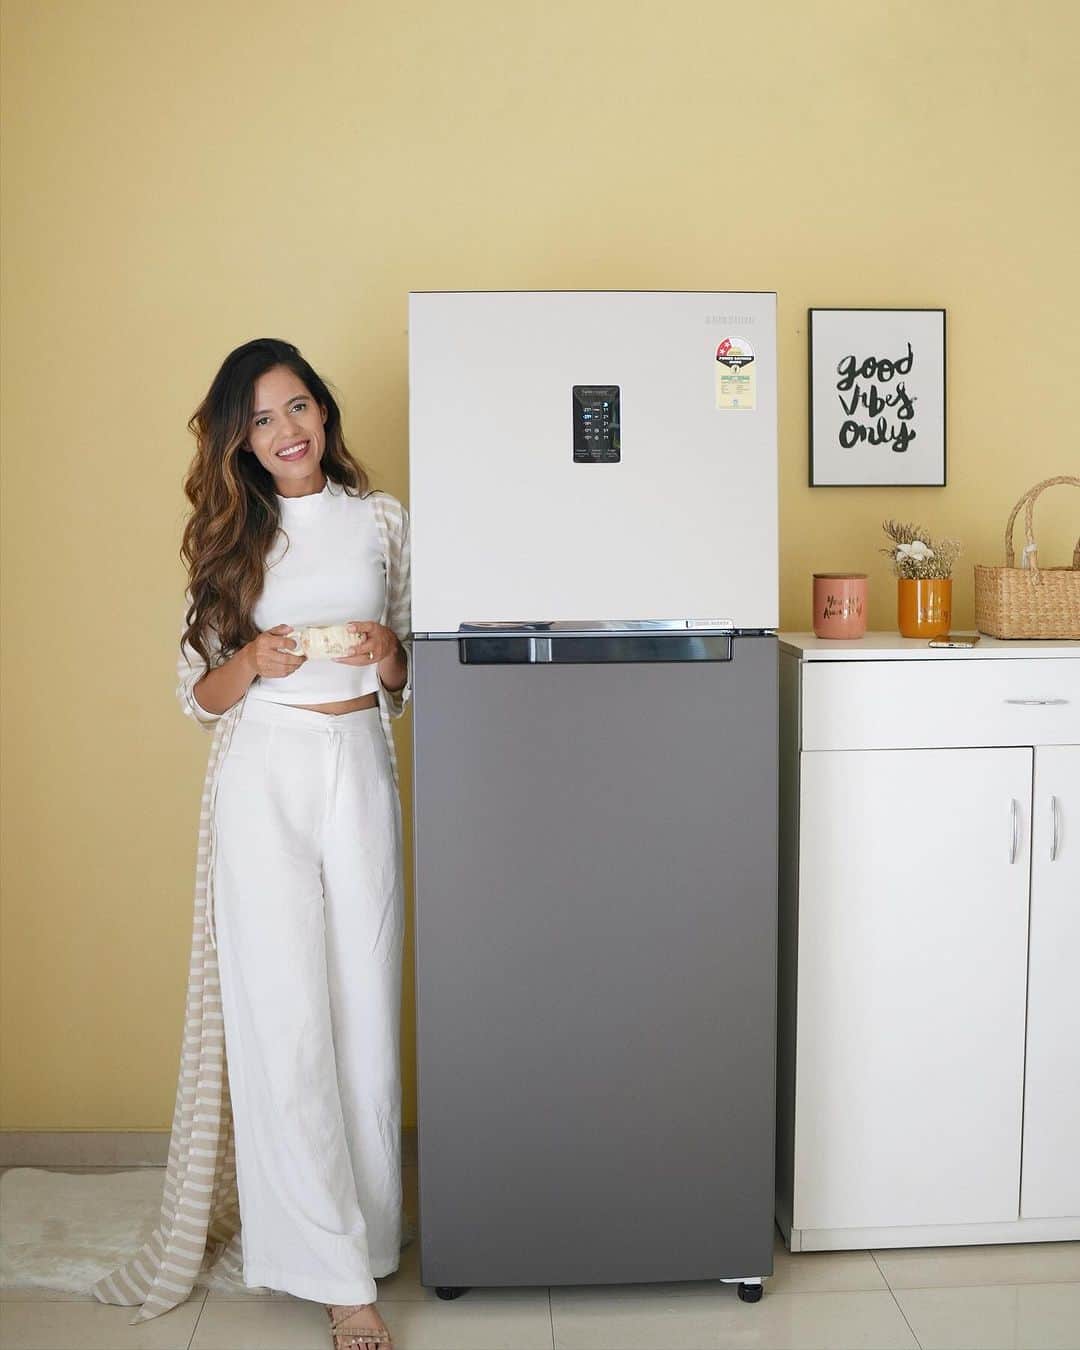 Aakriti Ranaのインスタグラム：「You know life is truly cool when you bring home the perfect refrigerator. My Bespoke Premium Cotta Steel refrigerator has everything I had been looking for. It’s got a great earthy vibe and a flexible 5-in-1 conversion mode for all my storage needs! Say a big yes to #BespokeDoubleDoor   #BESPOKEDoubleDoor #Ad #Samsung @samsungindia」